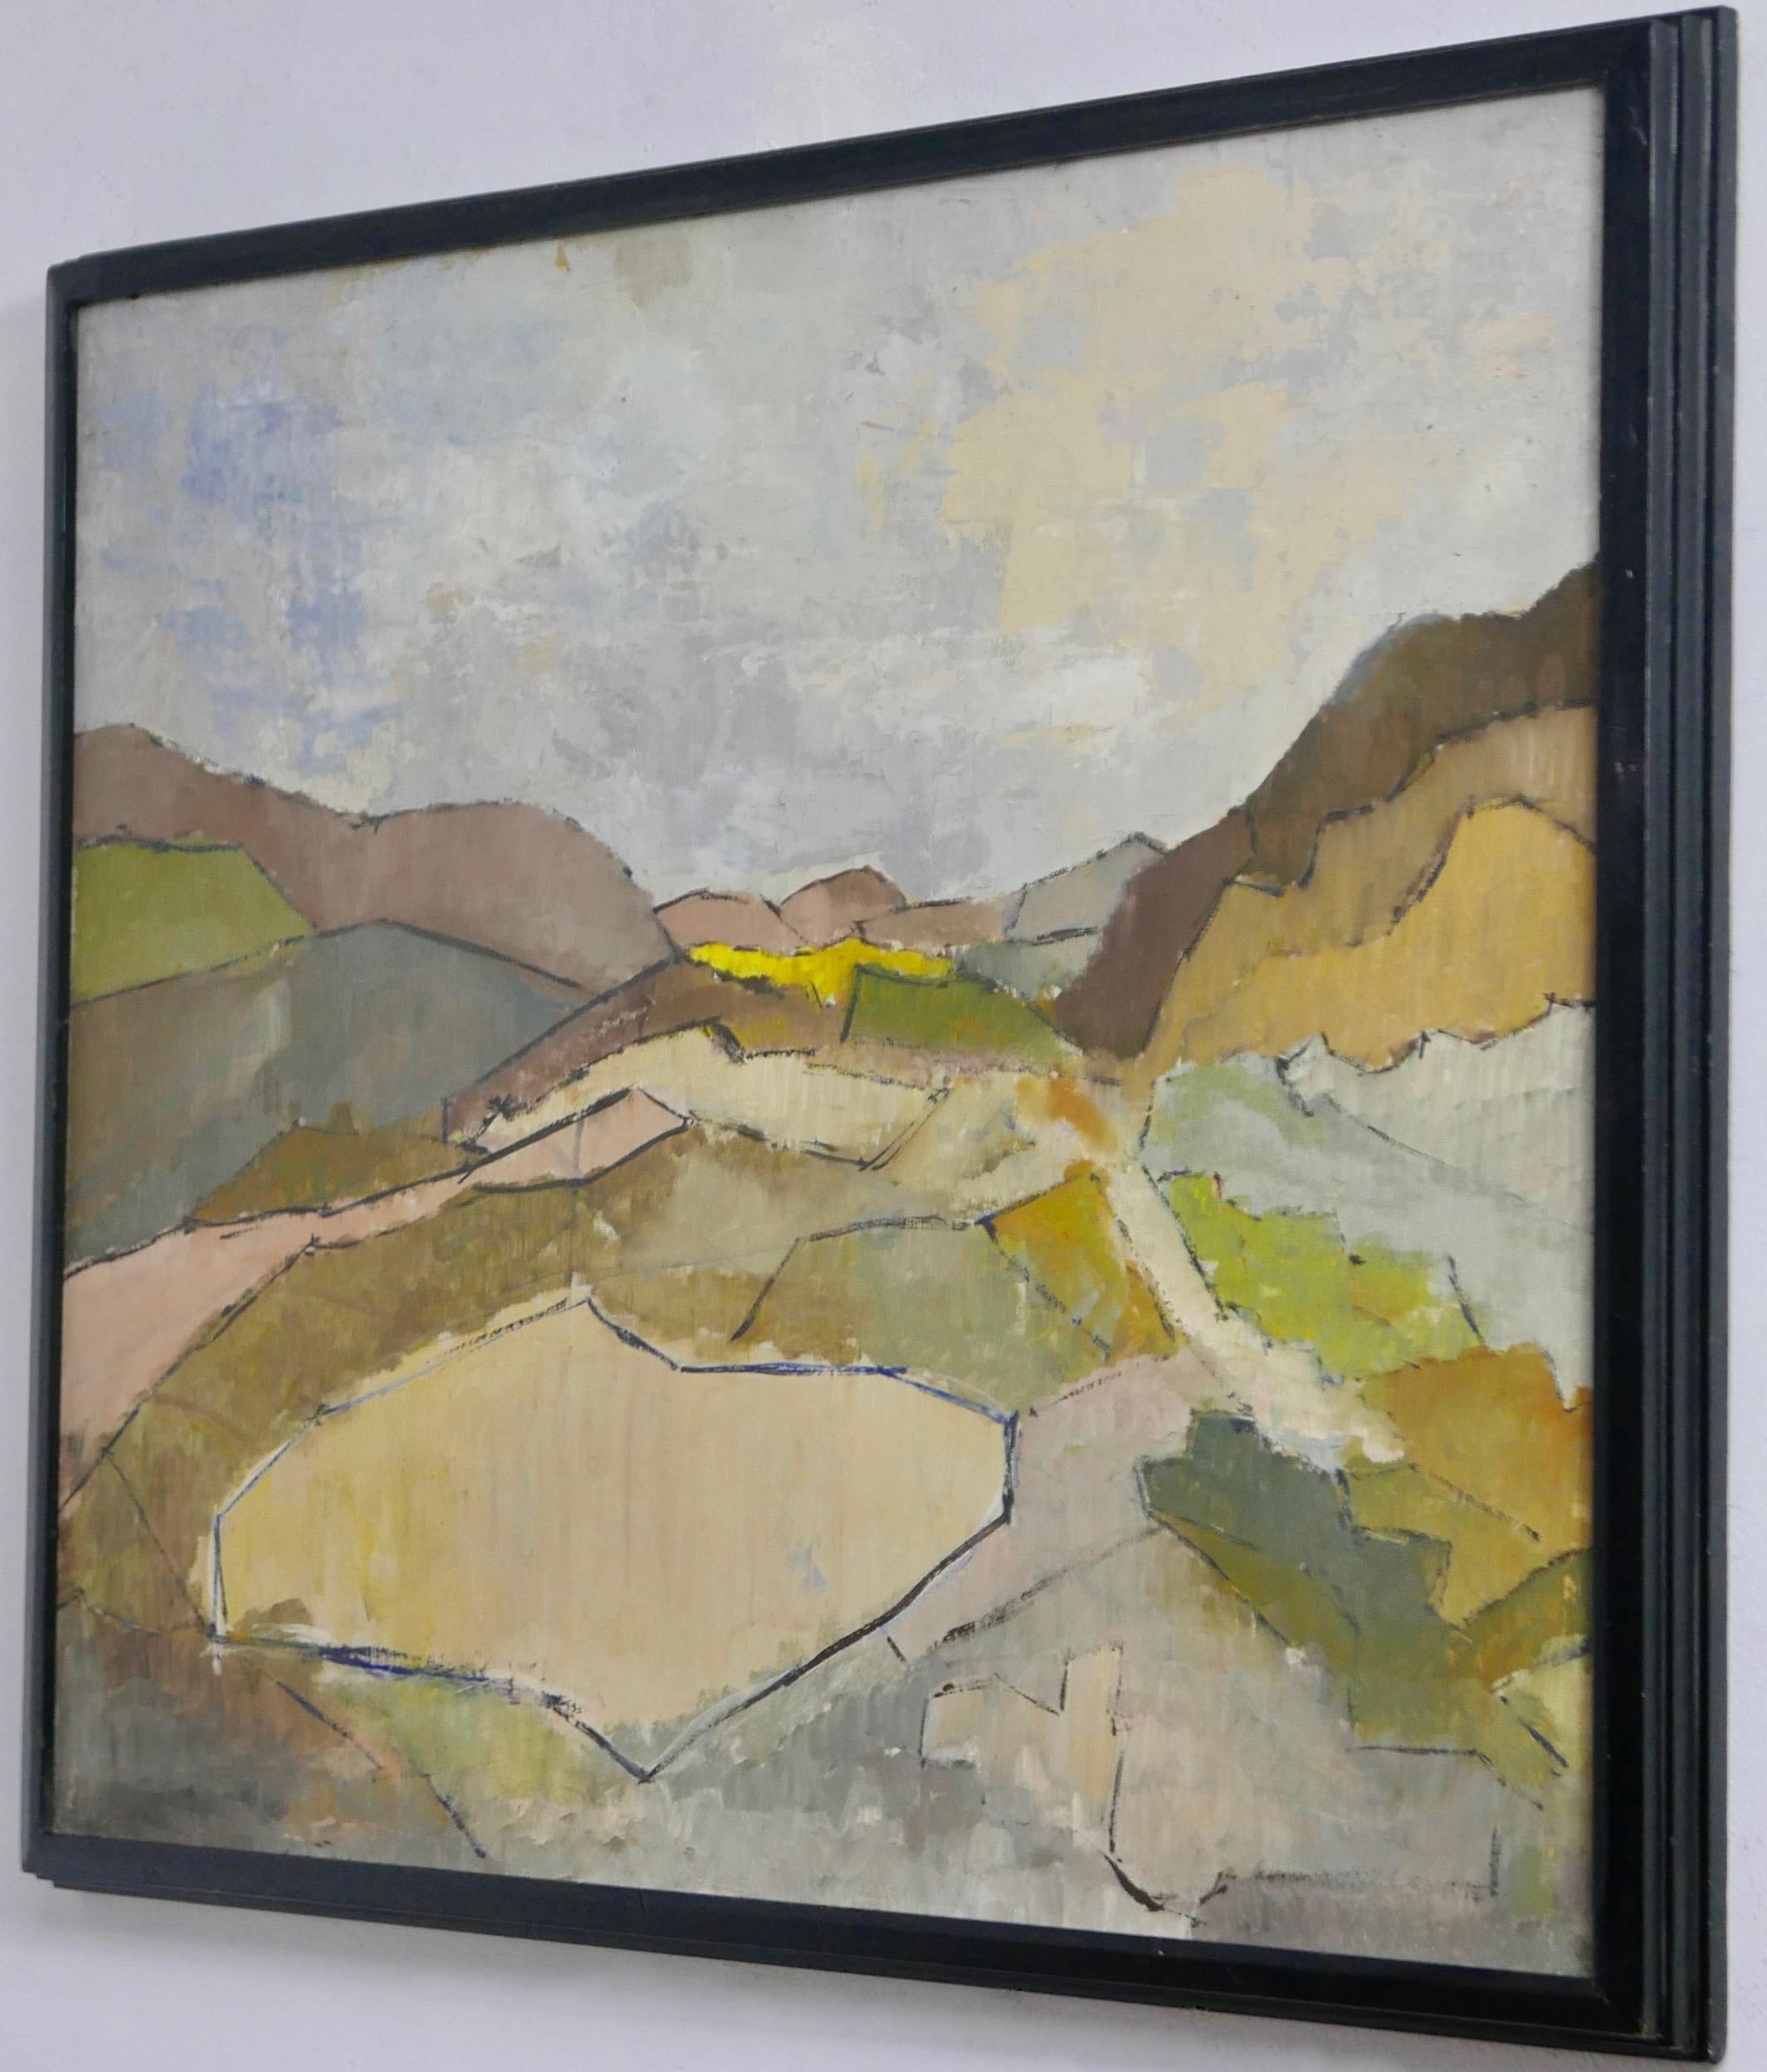 A midcentury oil on Masonite pallet knife and brushwork painting of the Carmel Valley by California artist Leonard G. Heller (1893-1966)
Signed in pen on the back of the original frame.
Heller was born in San Francisco in 1893. He studied art at